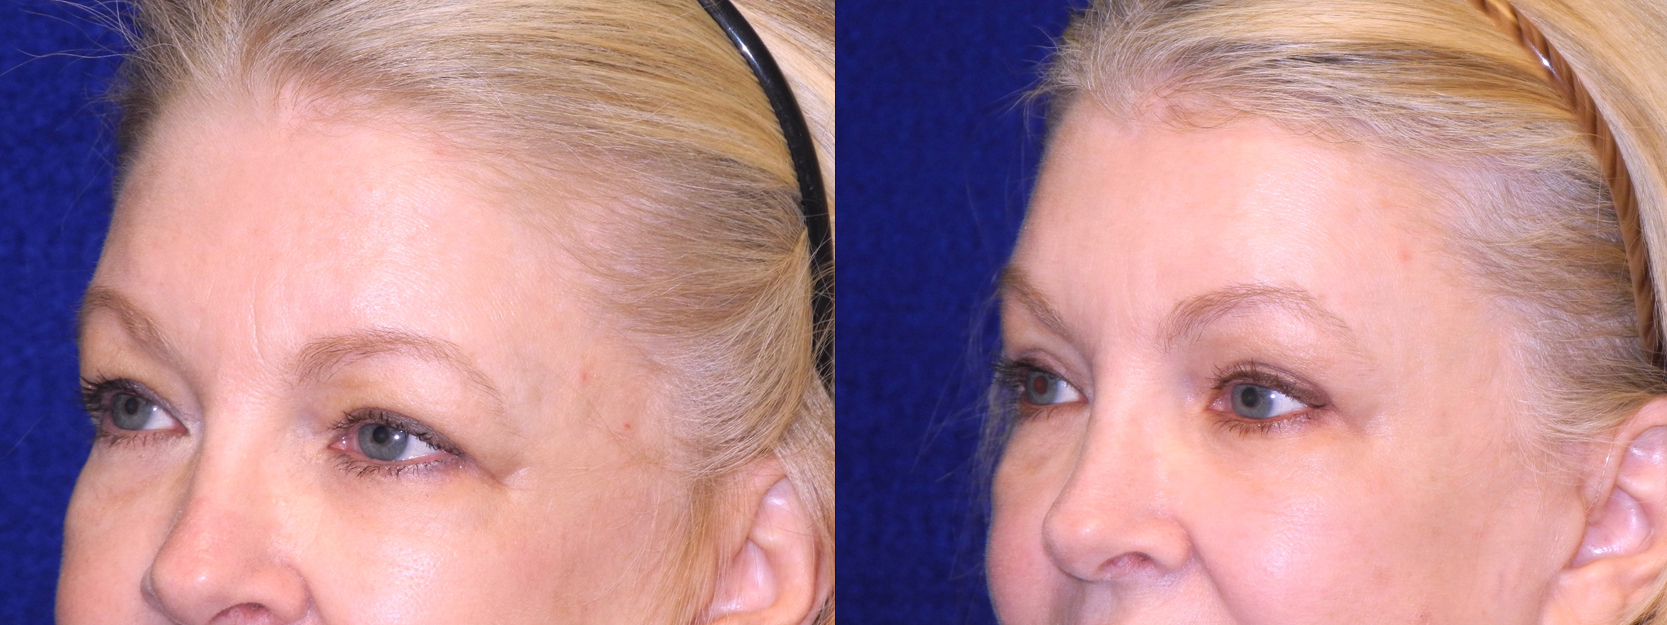 Left 3/4 View Close Up - Facelft, Browlift and Upper Eyelid Surgery